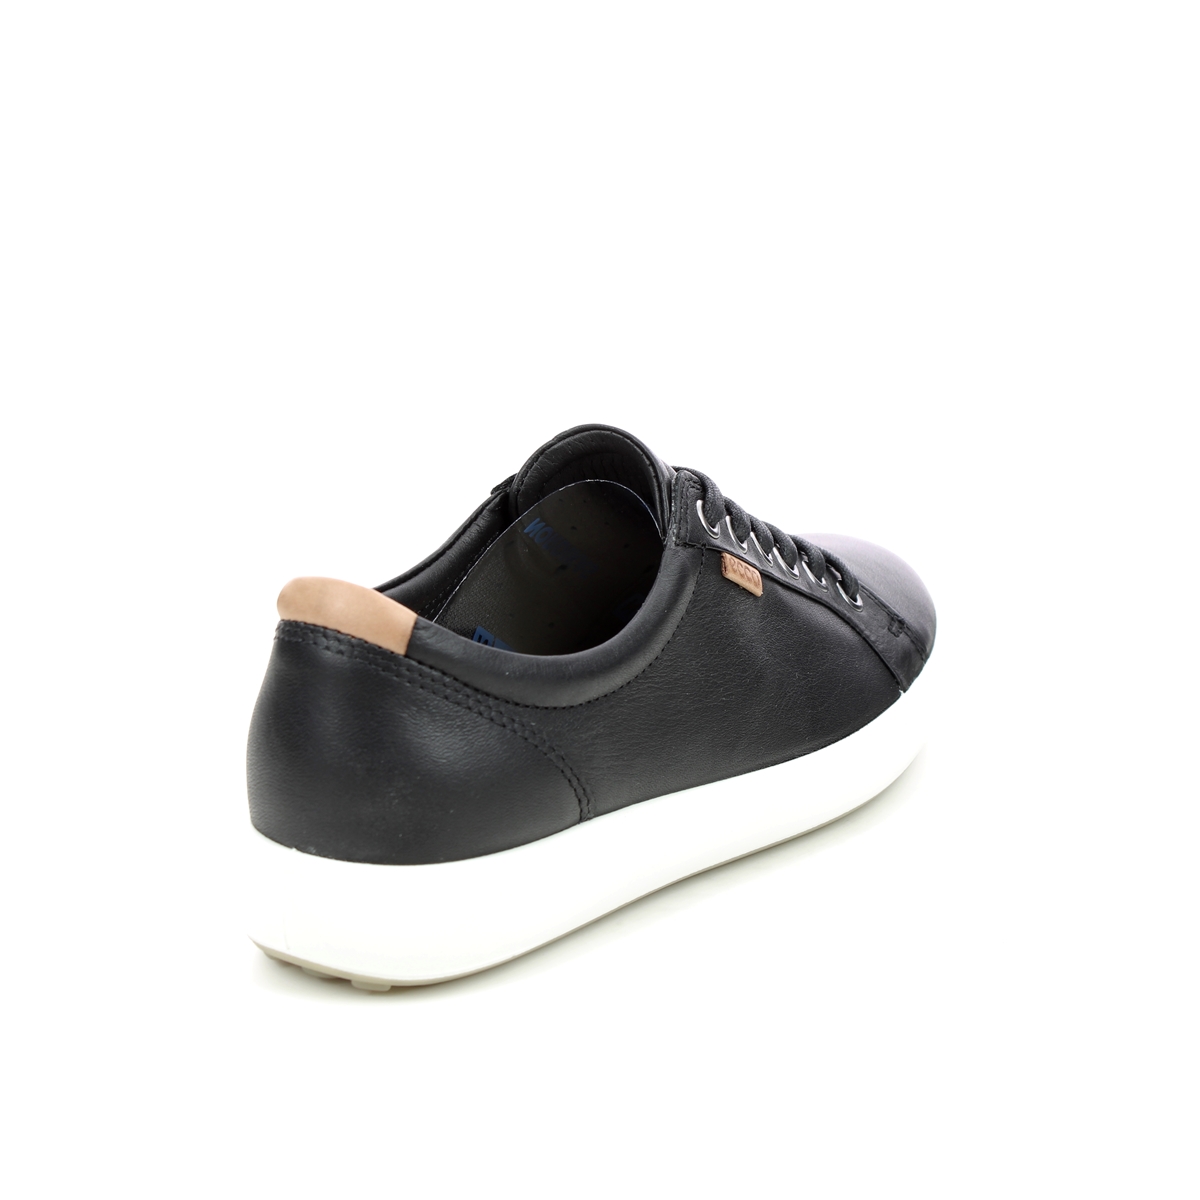 Ecco - Soft 7 Laced Shoes Black - 430003, The Shoe Horn